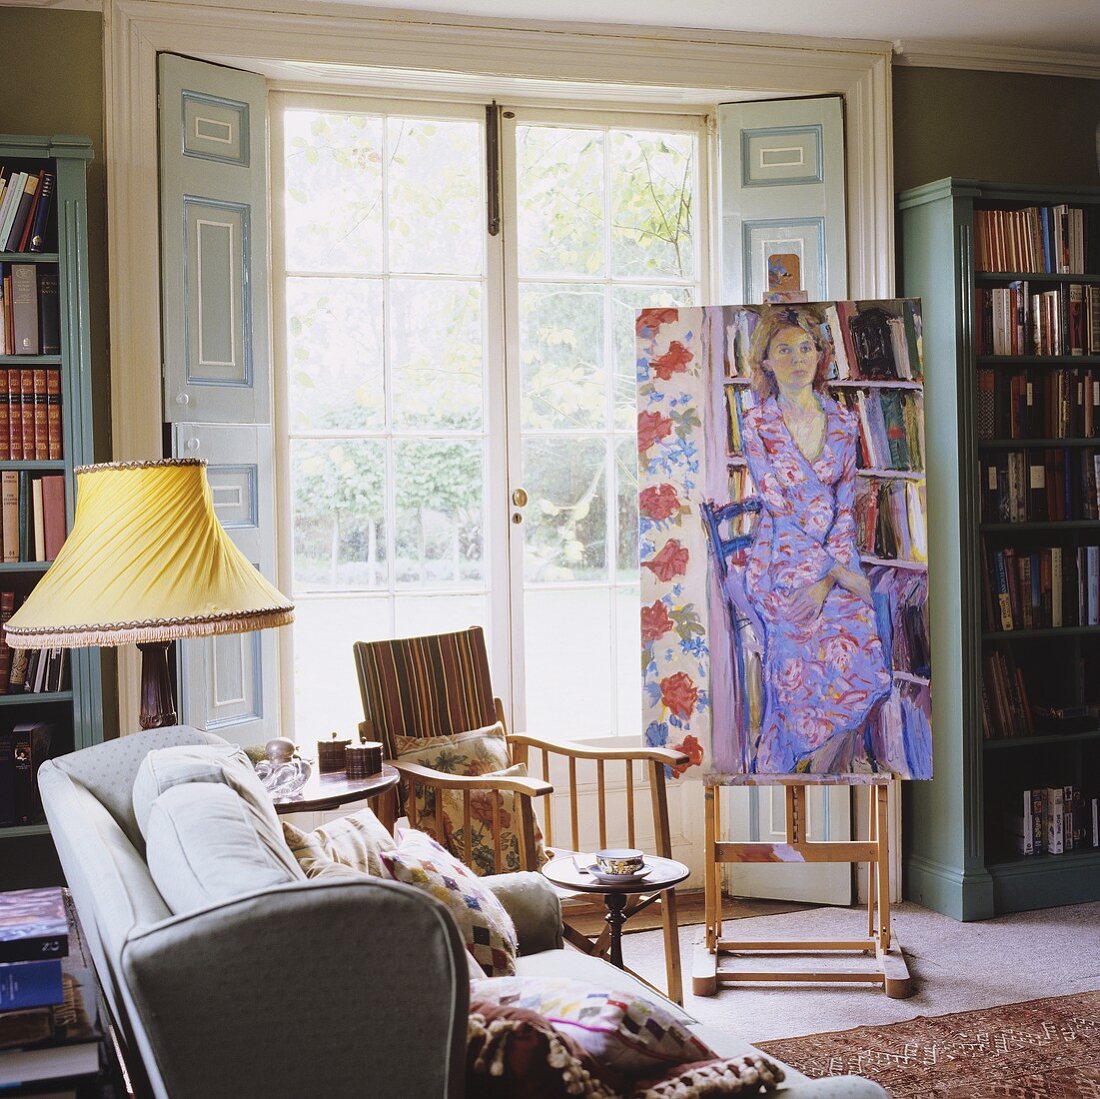 Living room in a country house with easel and picture in front of French doors with